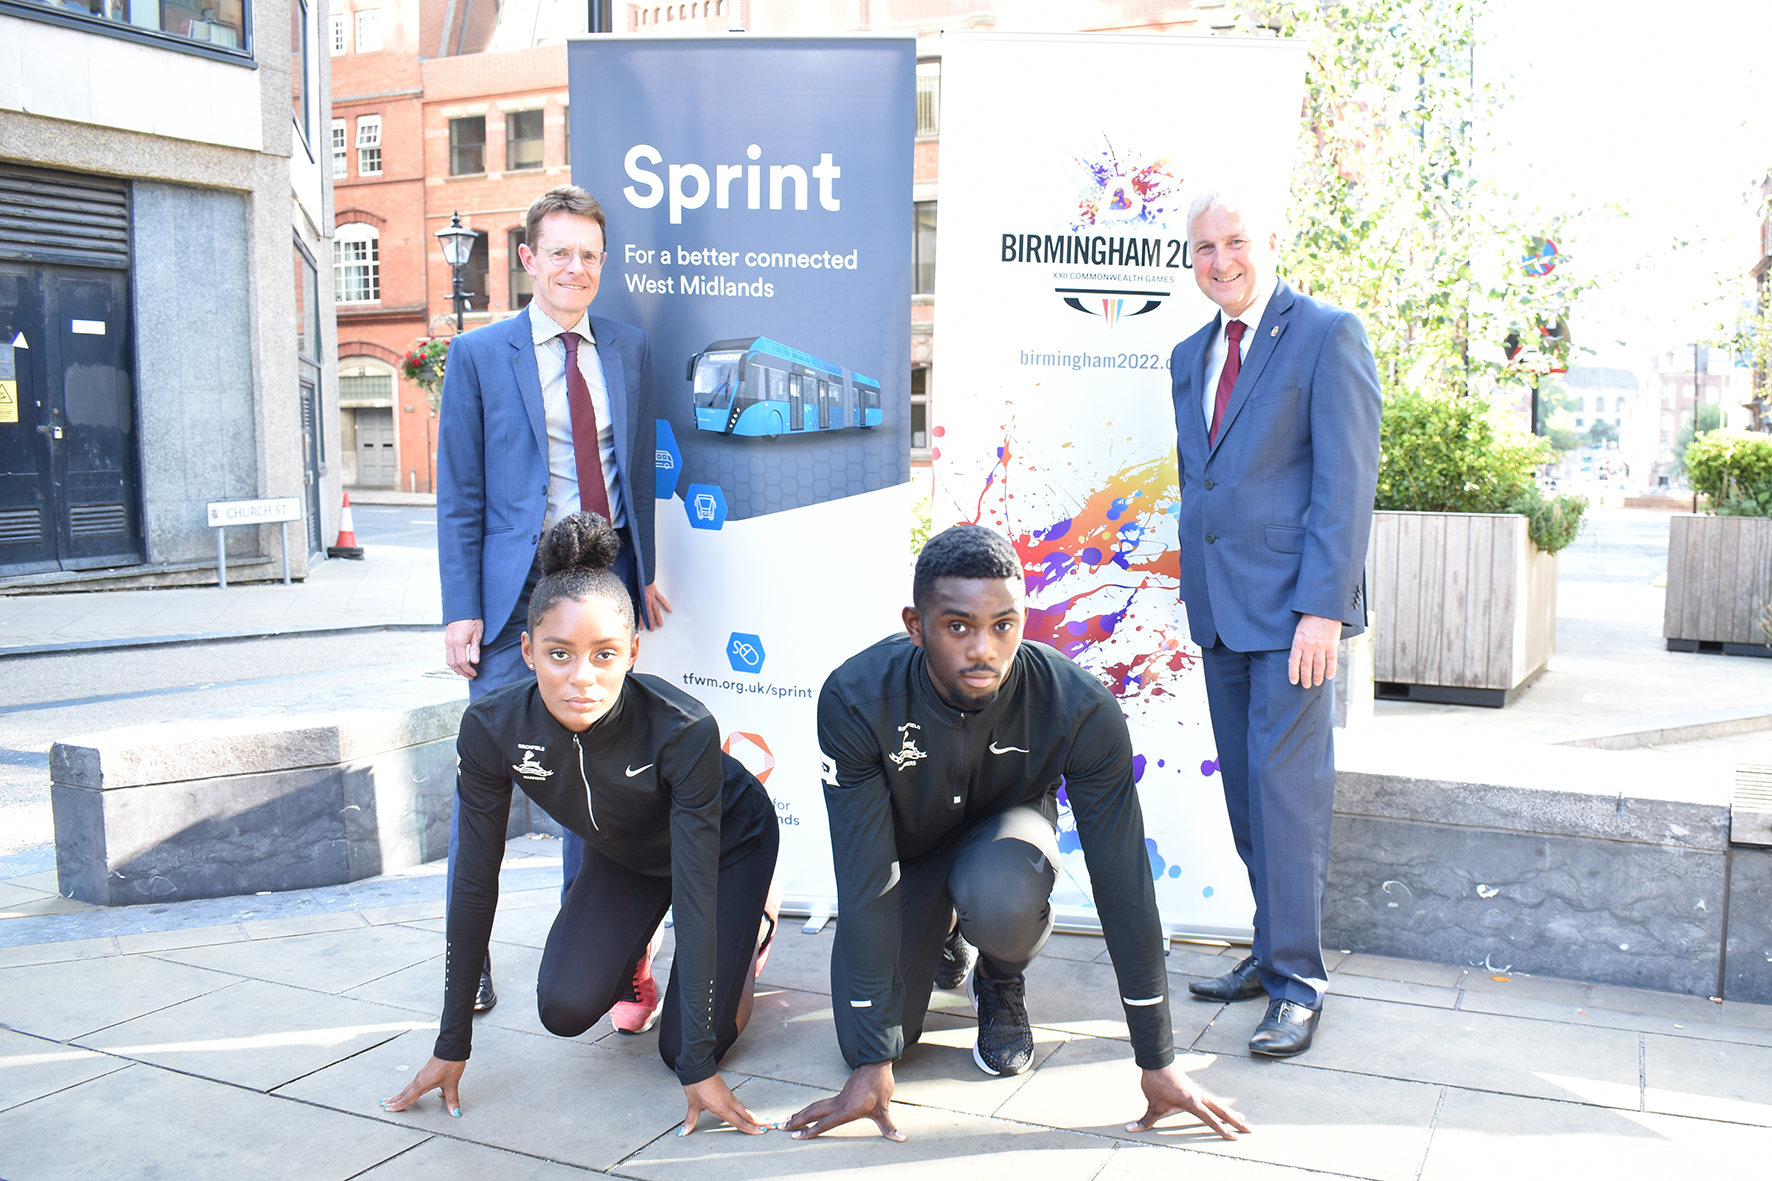 Get Set Go. Birchfield Harriers Kaie Chambers-Brown (Great Britain U20) and Cassie-Anne Pemberton (Great Britain U18) launch the Sprint consultation with Mayor of the West Midlands Andy Street (left) and Cllr Ian Ward, leader of Birmingham City Council